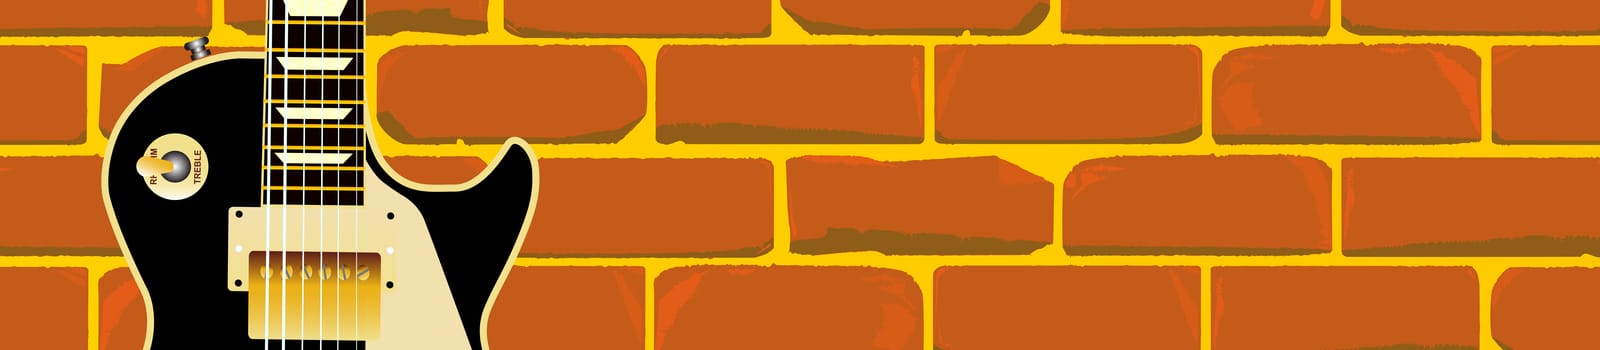 An electric guiar laying against a brick wall web banner background